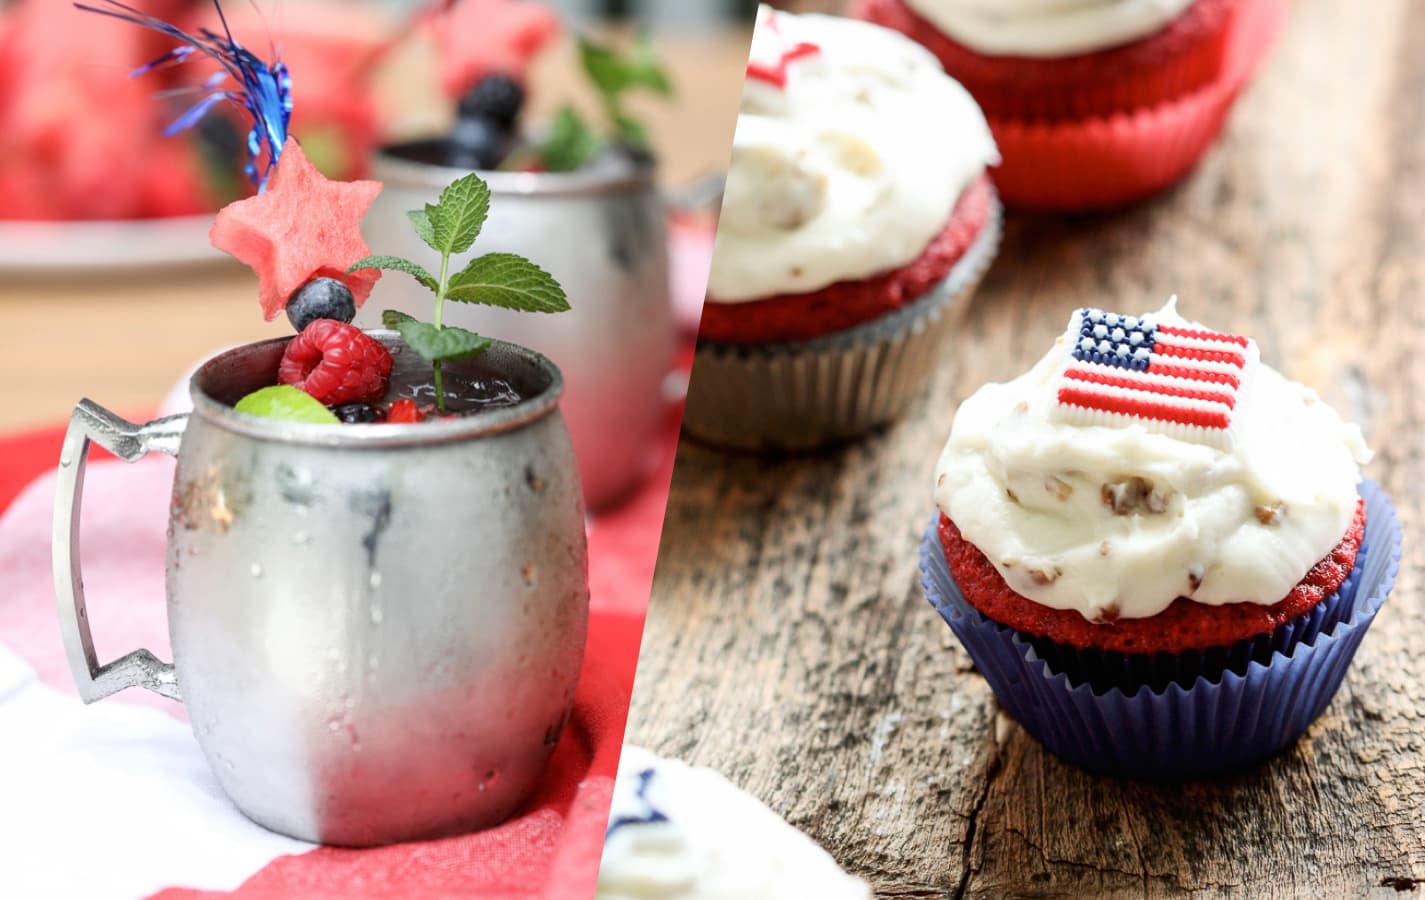 The Best 4th of July Recipes #4thofJuly #recipes #independence #day #dessert #picnic #cookout